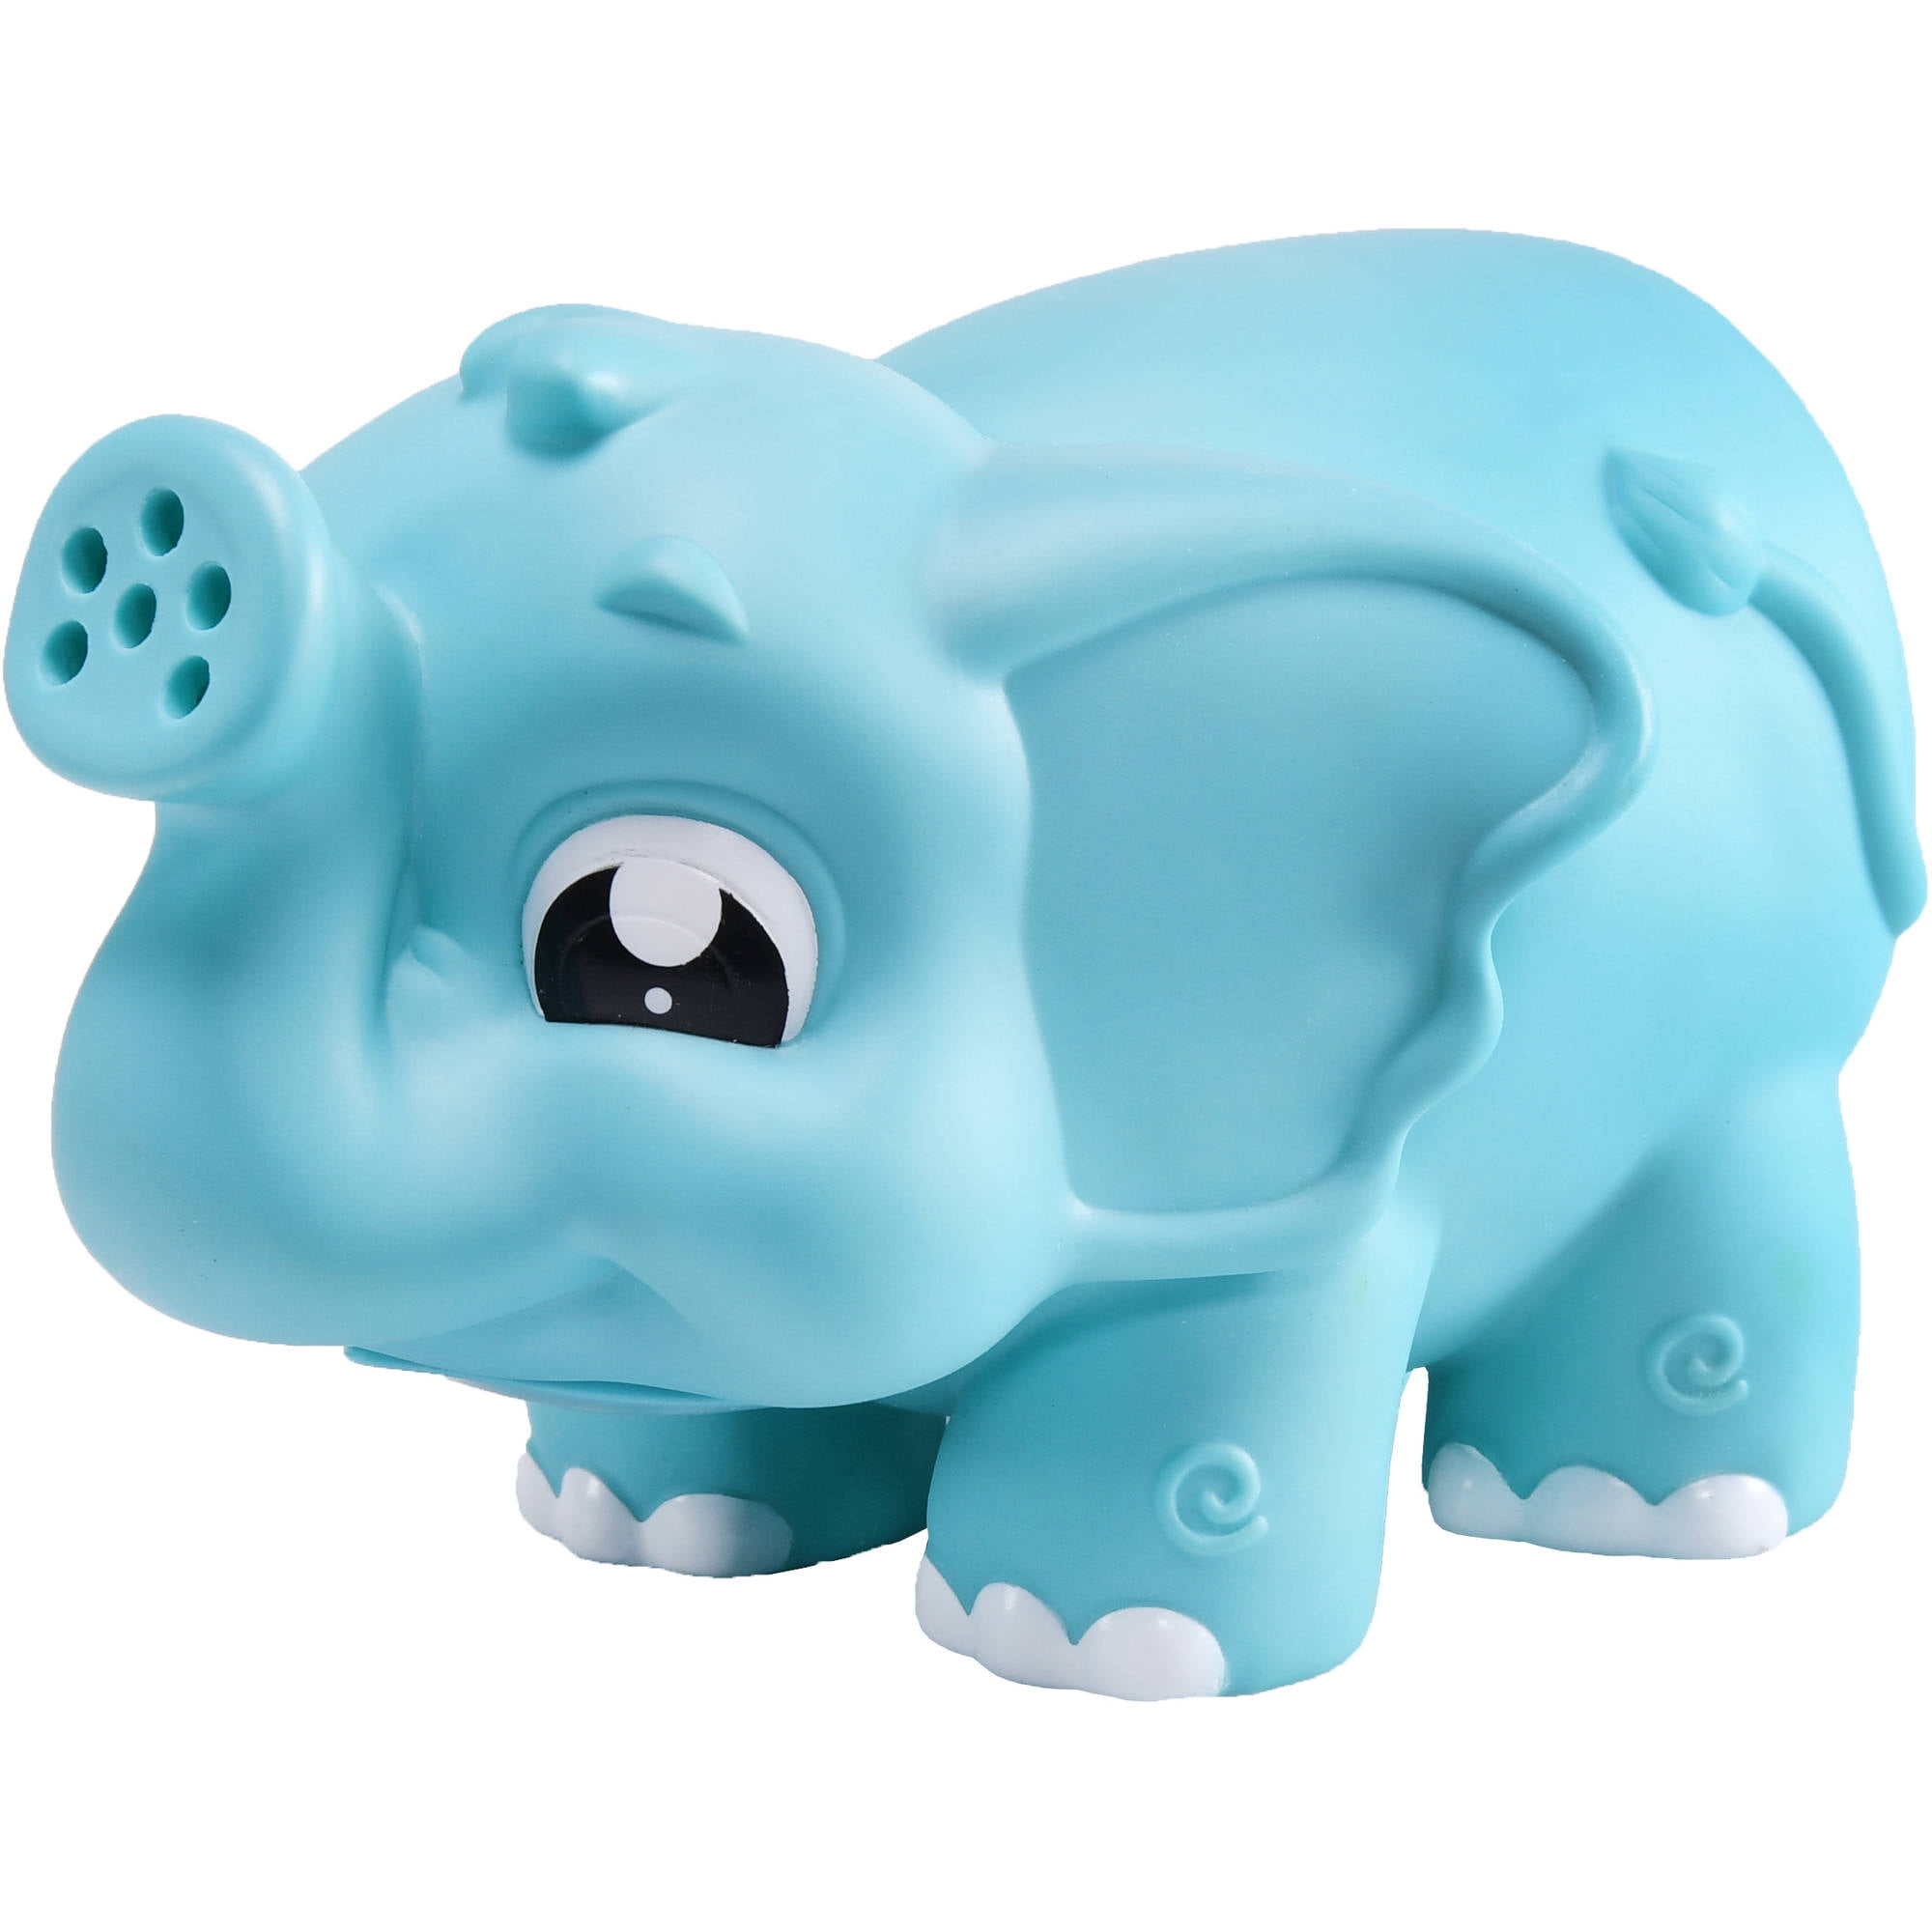 friends Hippo and Elephant Bath Tub Faucet  Cover Protector Guard & Bubble new 